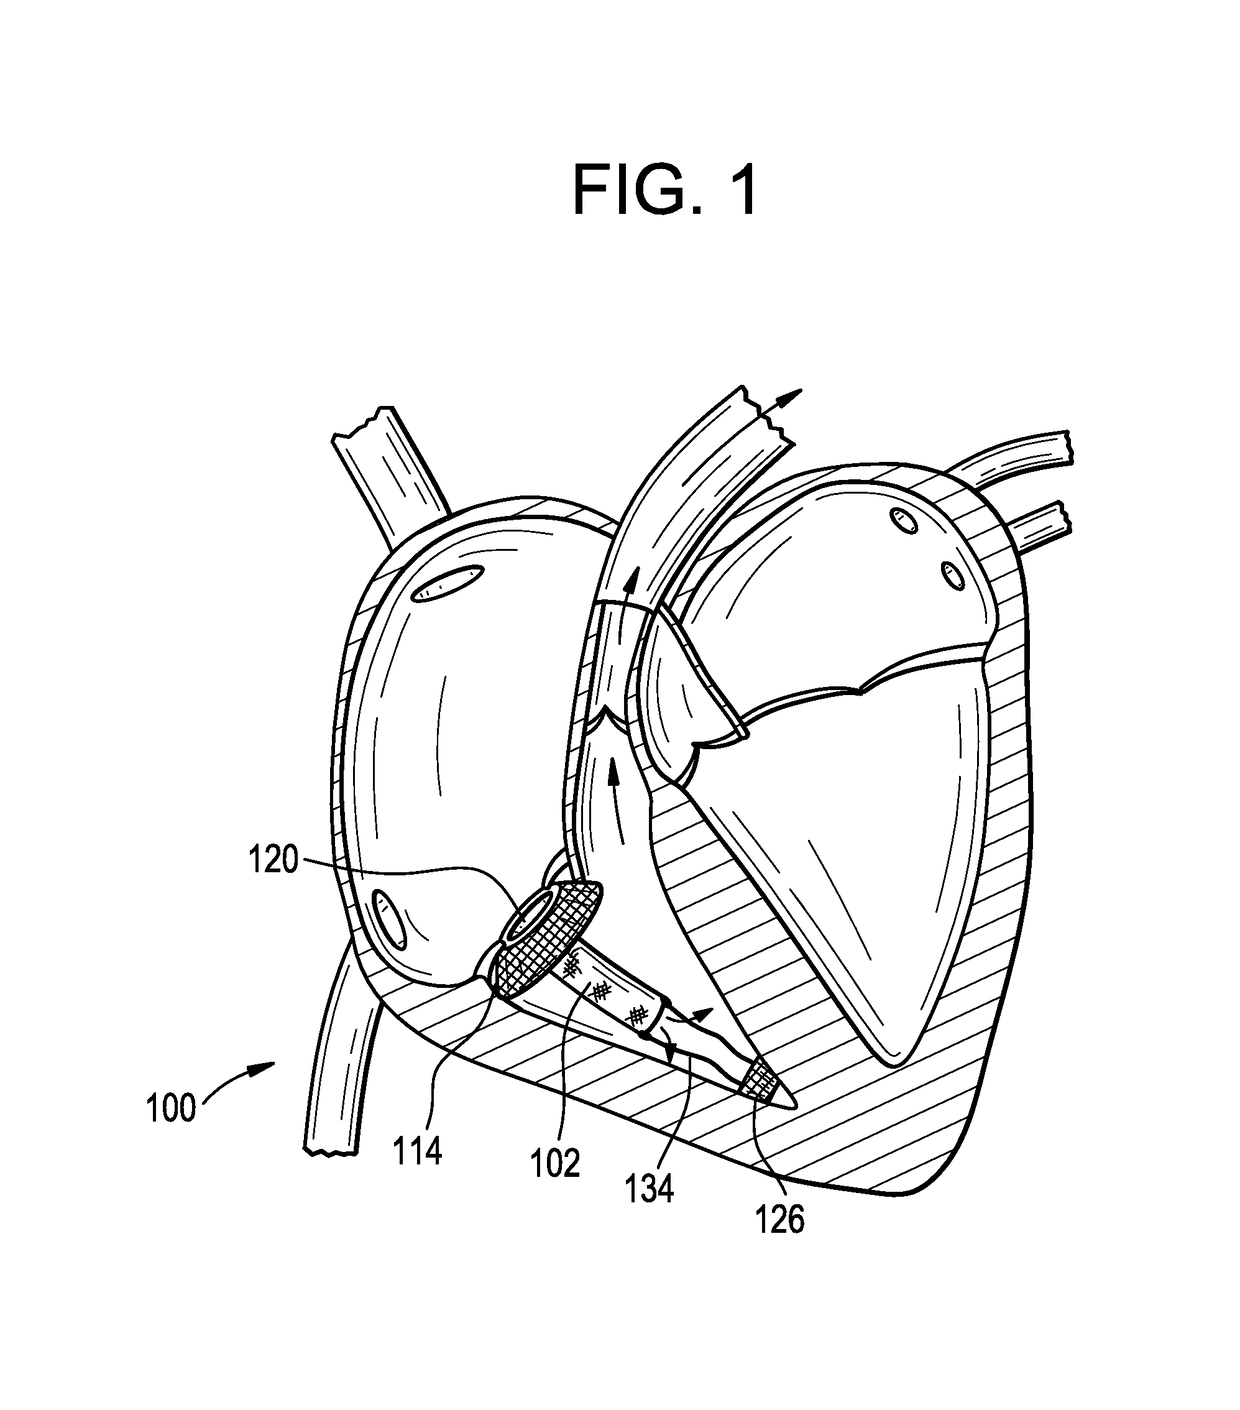 Pressure differential actuated prosthetic medical device